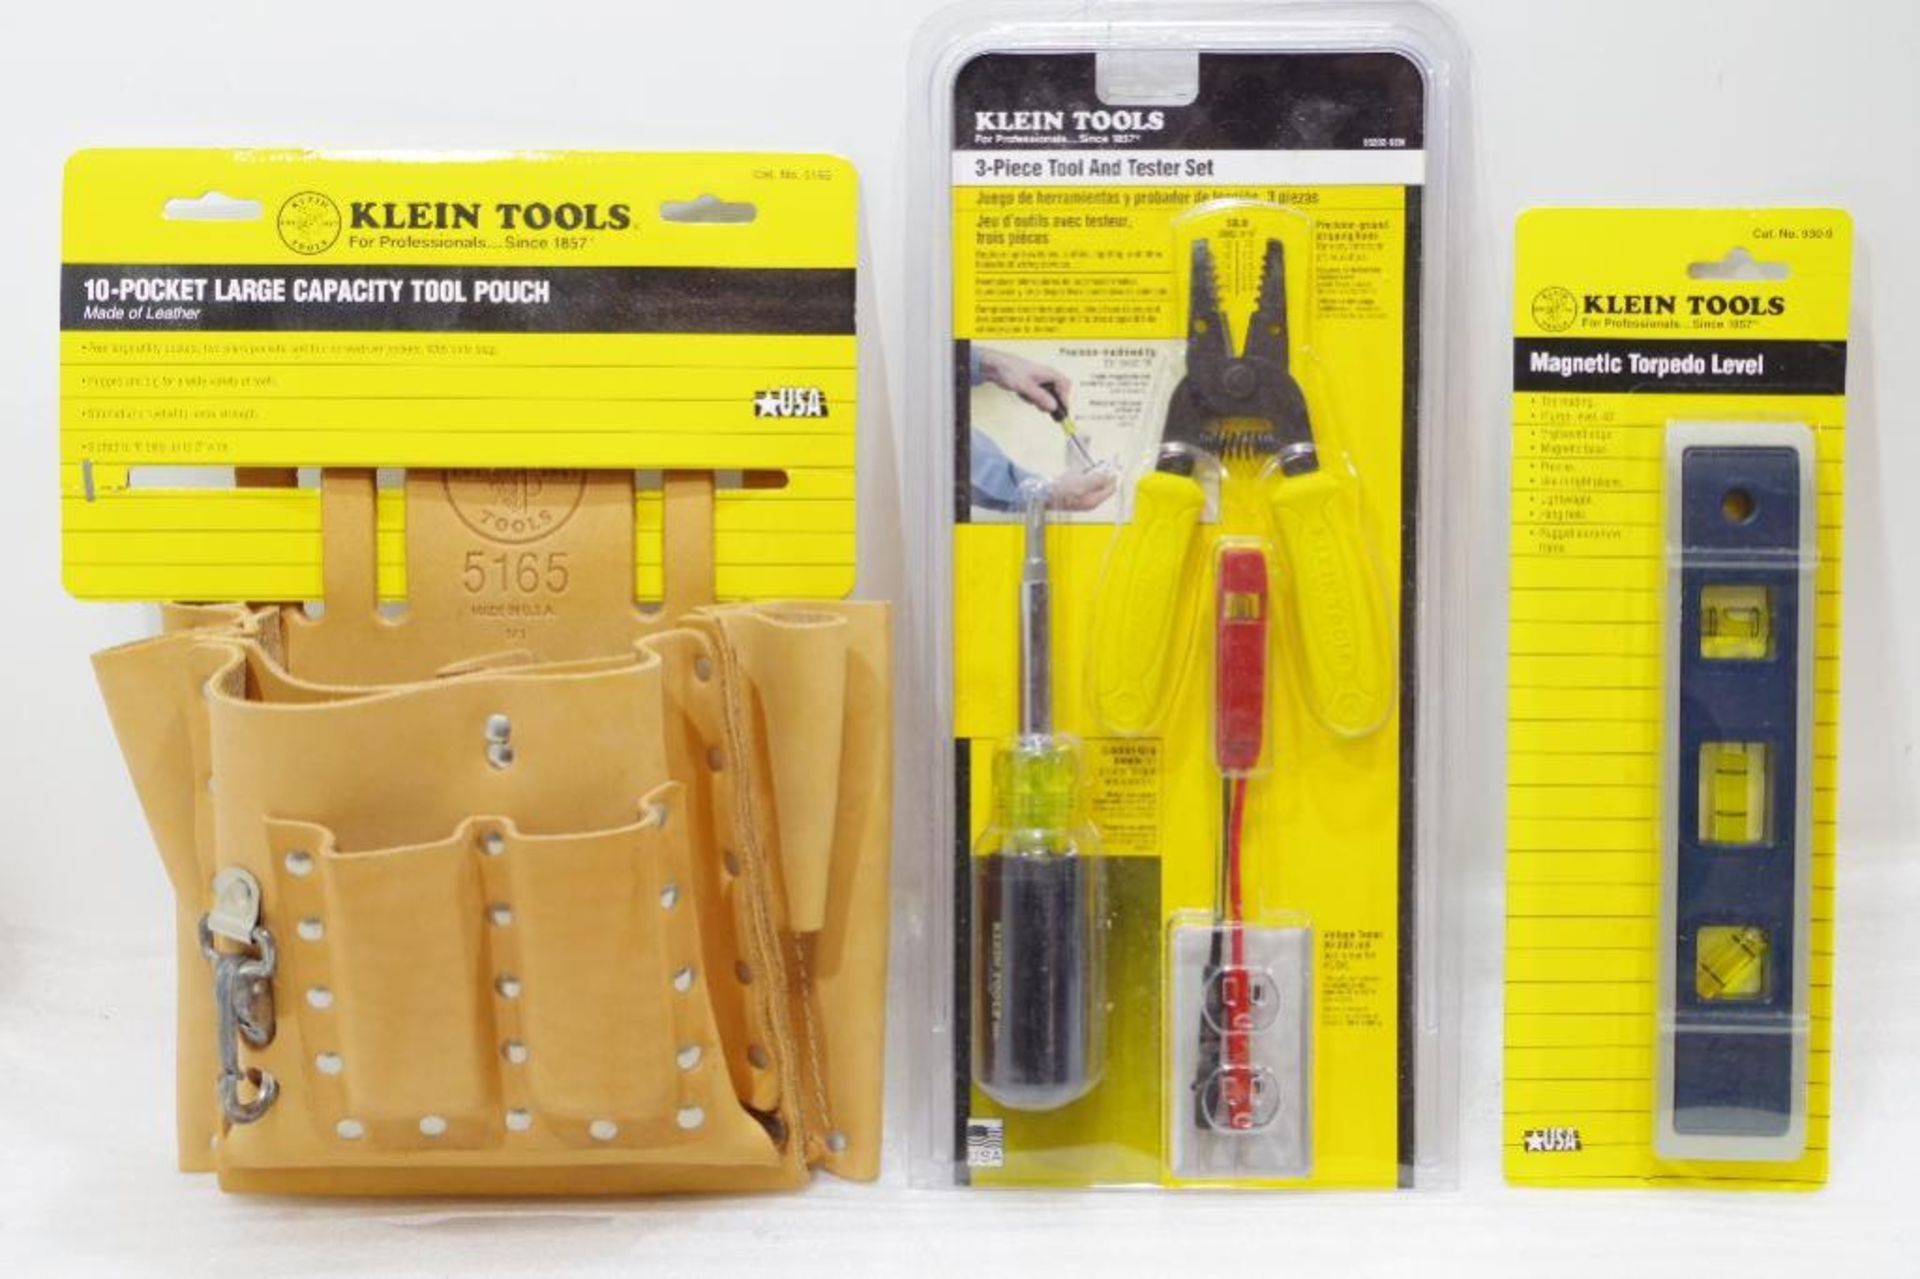 (3) NEW KLEIN Electrical Tools: (1) Magnetic Torpedo Level, (1) Tool Pouch, (1) Tool & Tester Set